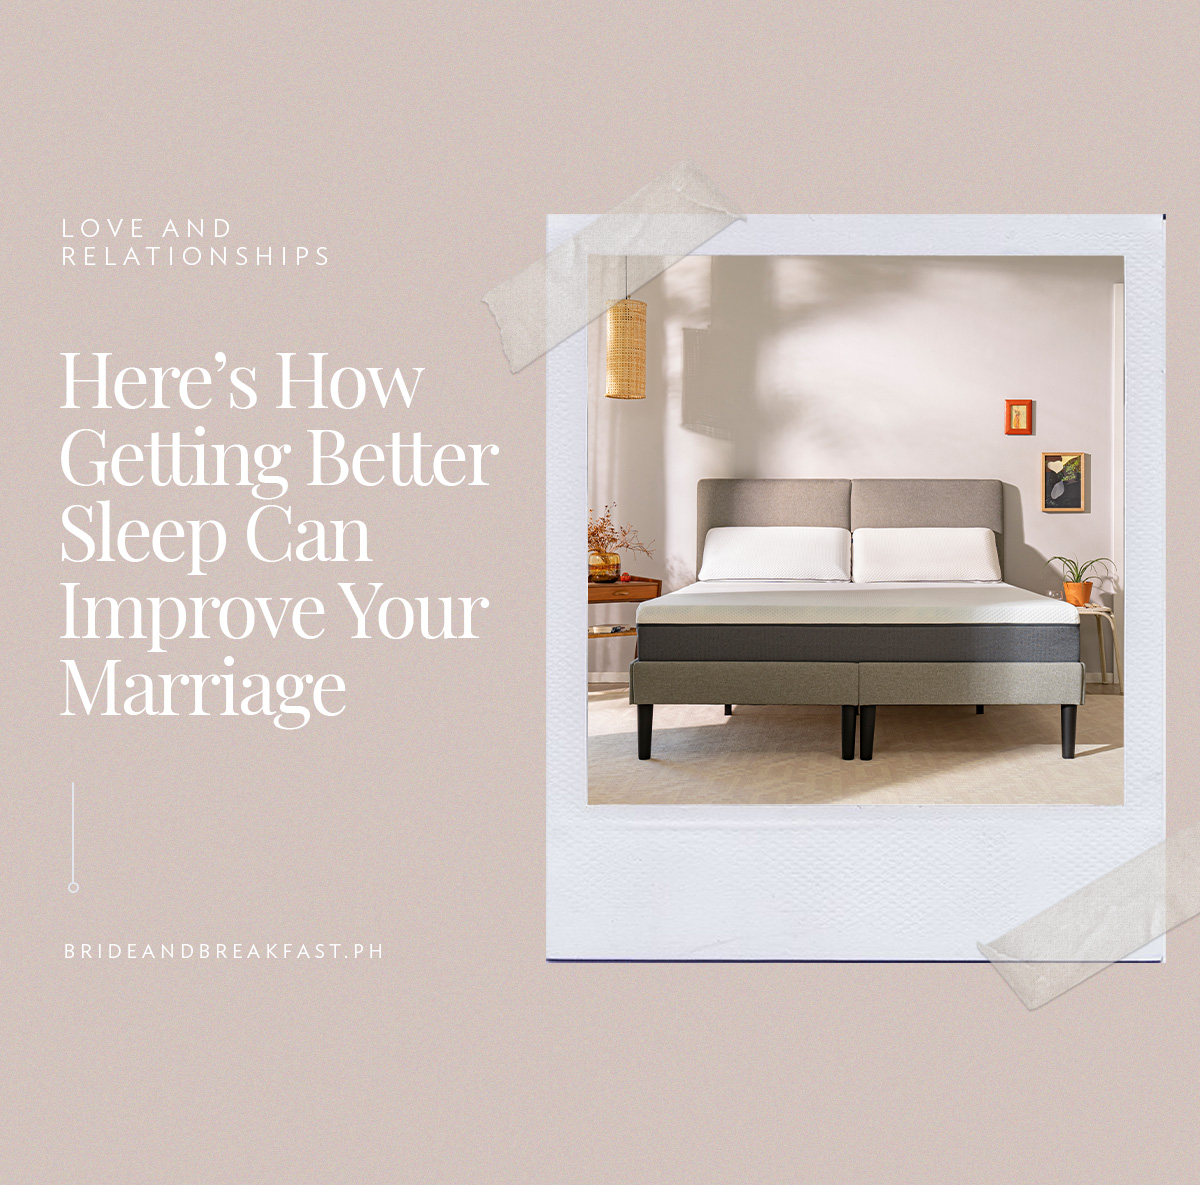 Here’s How Getting Better Sleep Can Improve Your Marriage